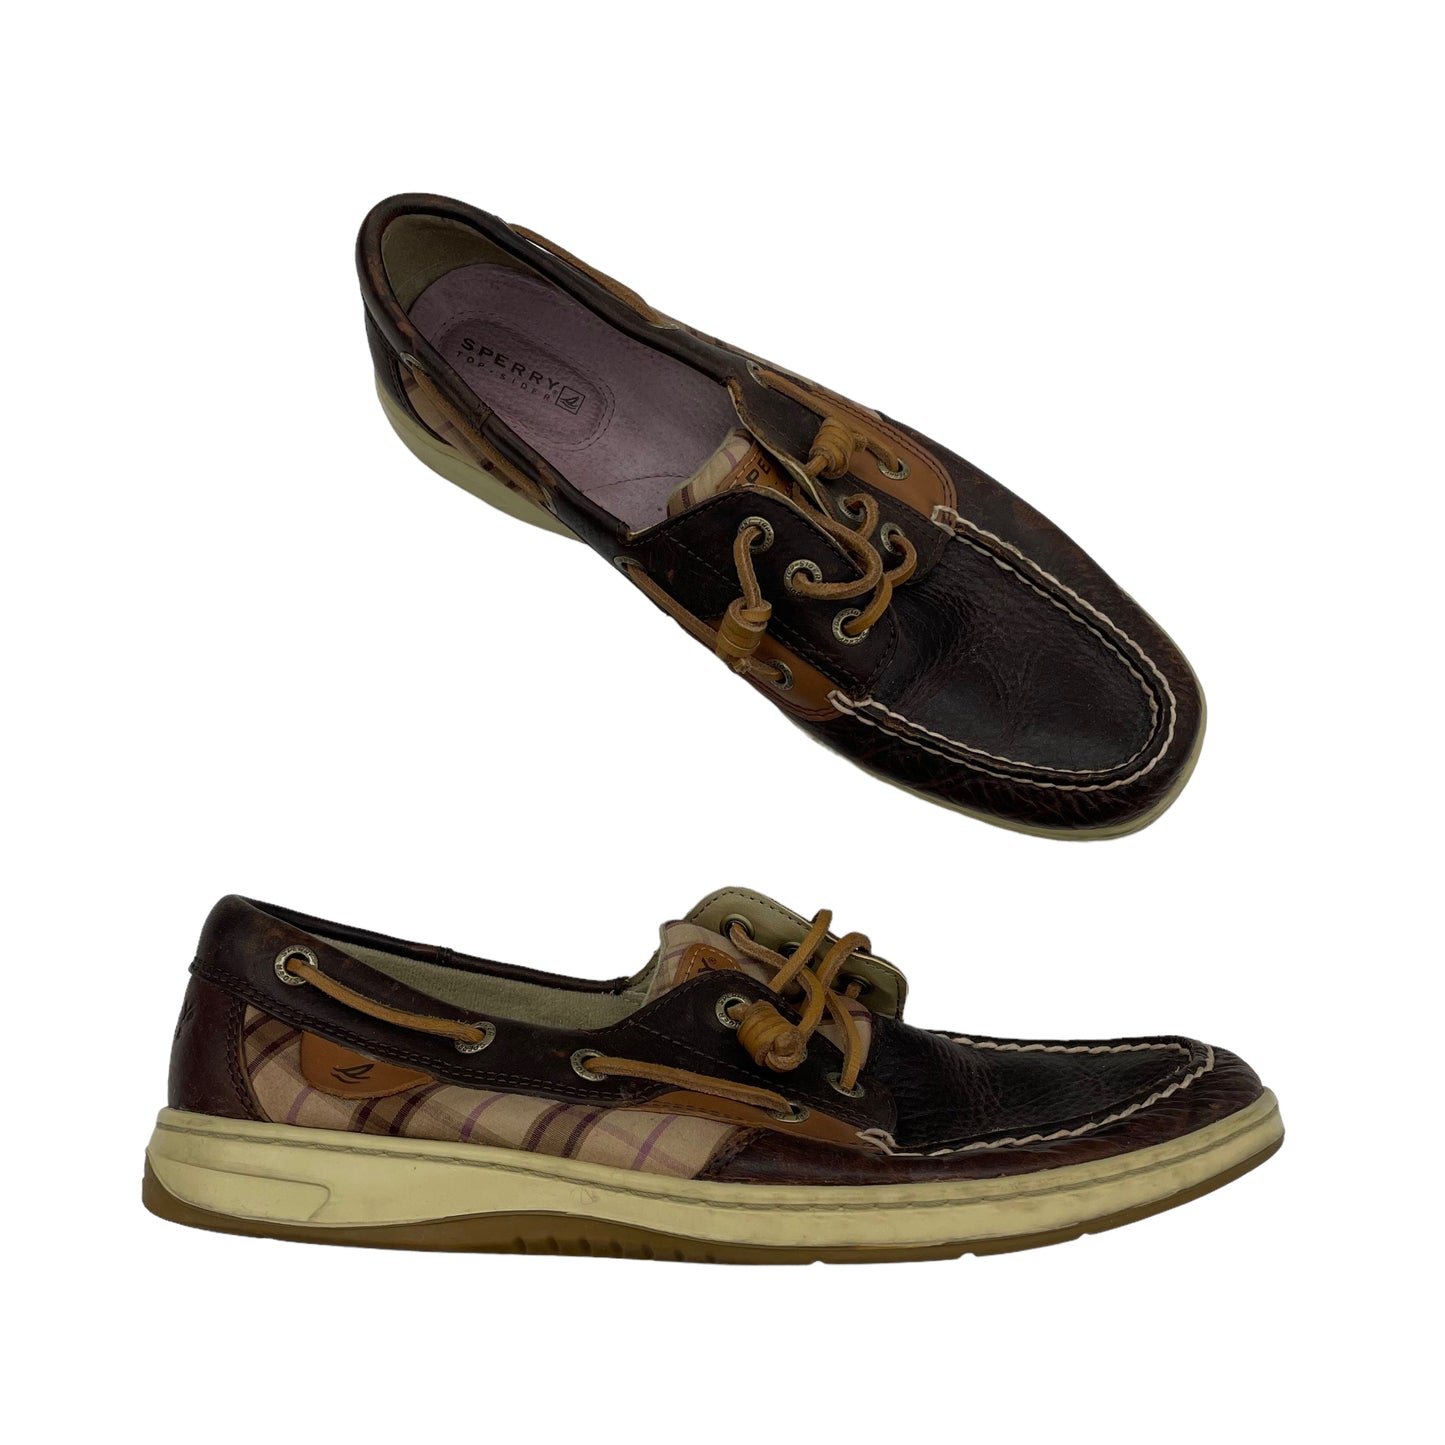 Shoes Flats Mule & Slide By Sperry  Size: 9